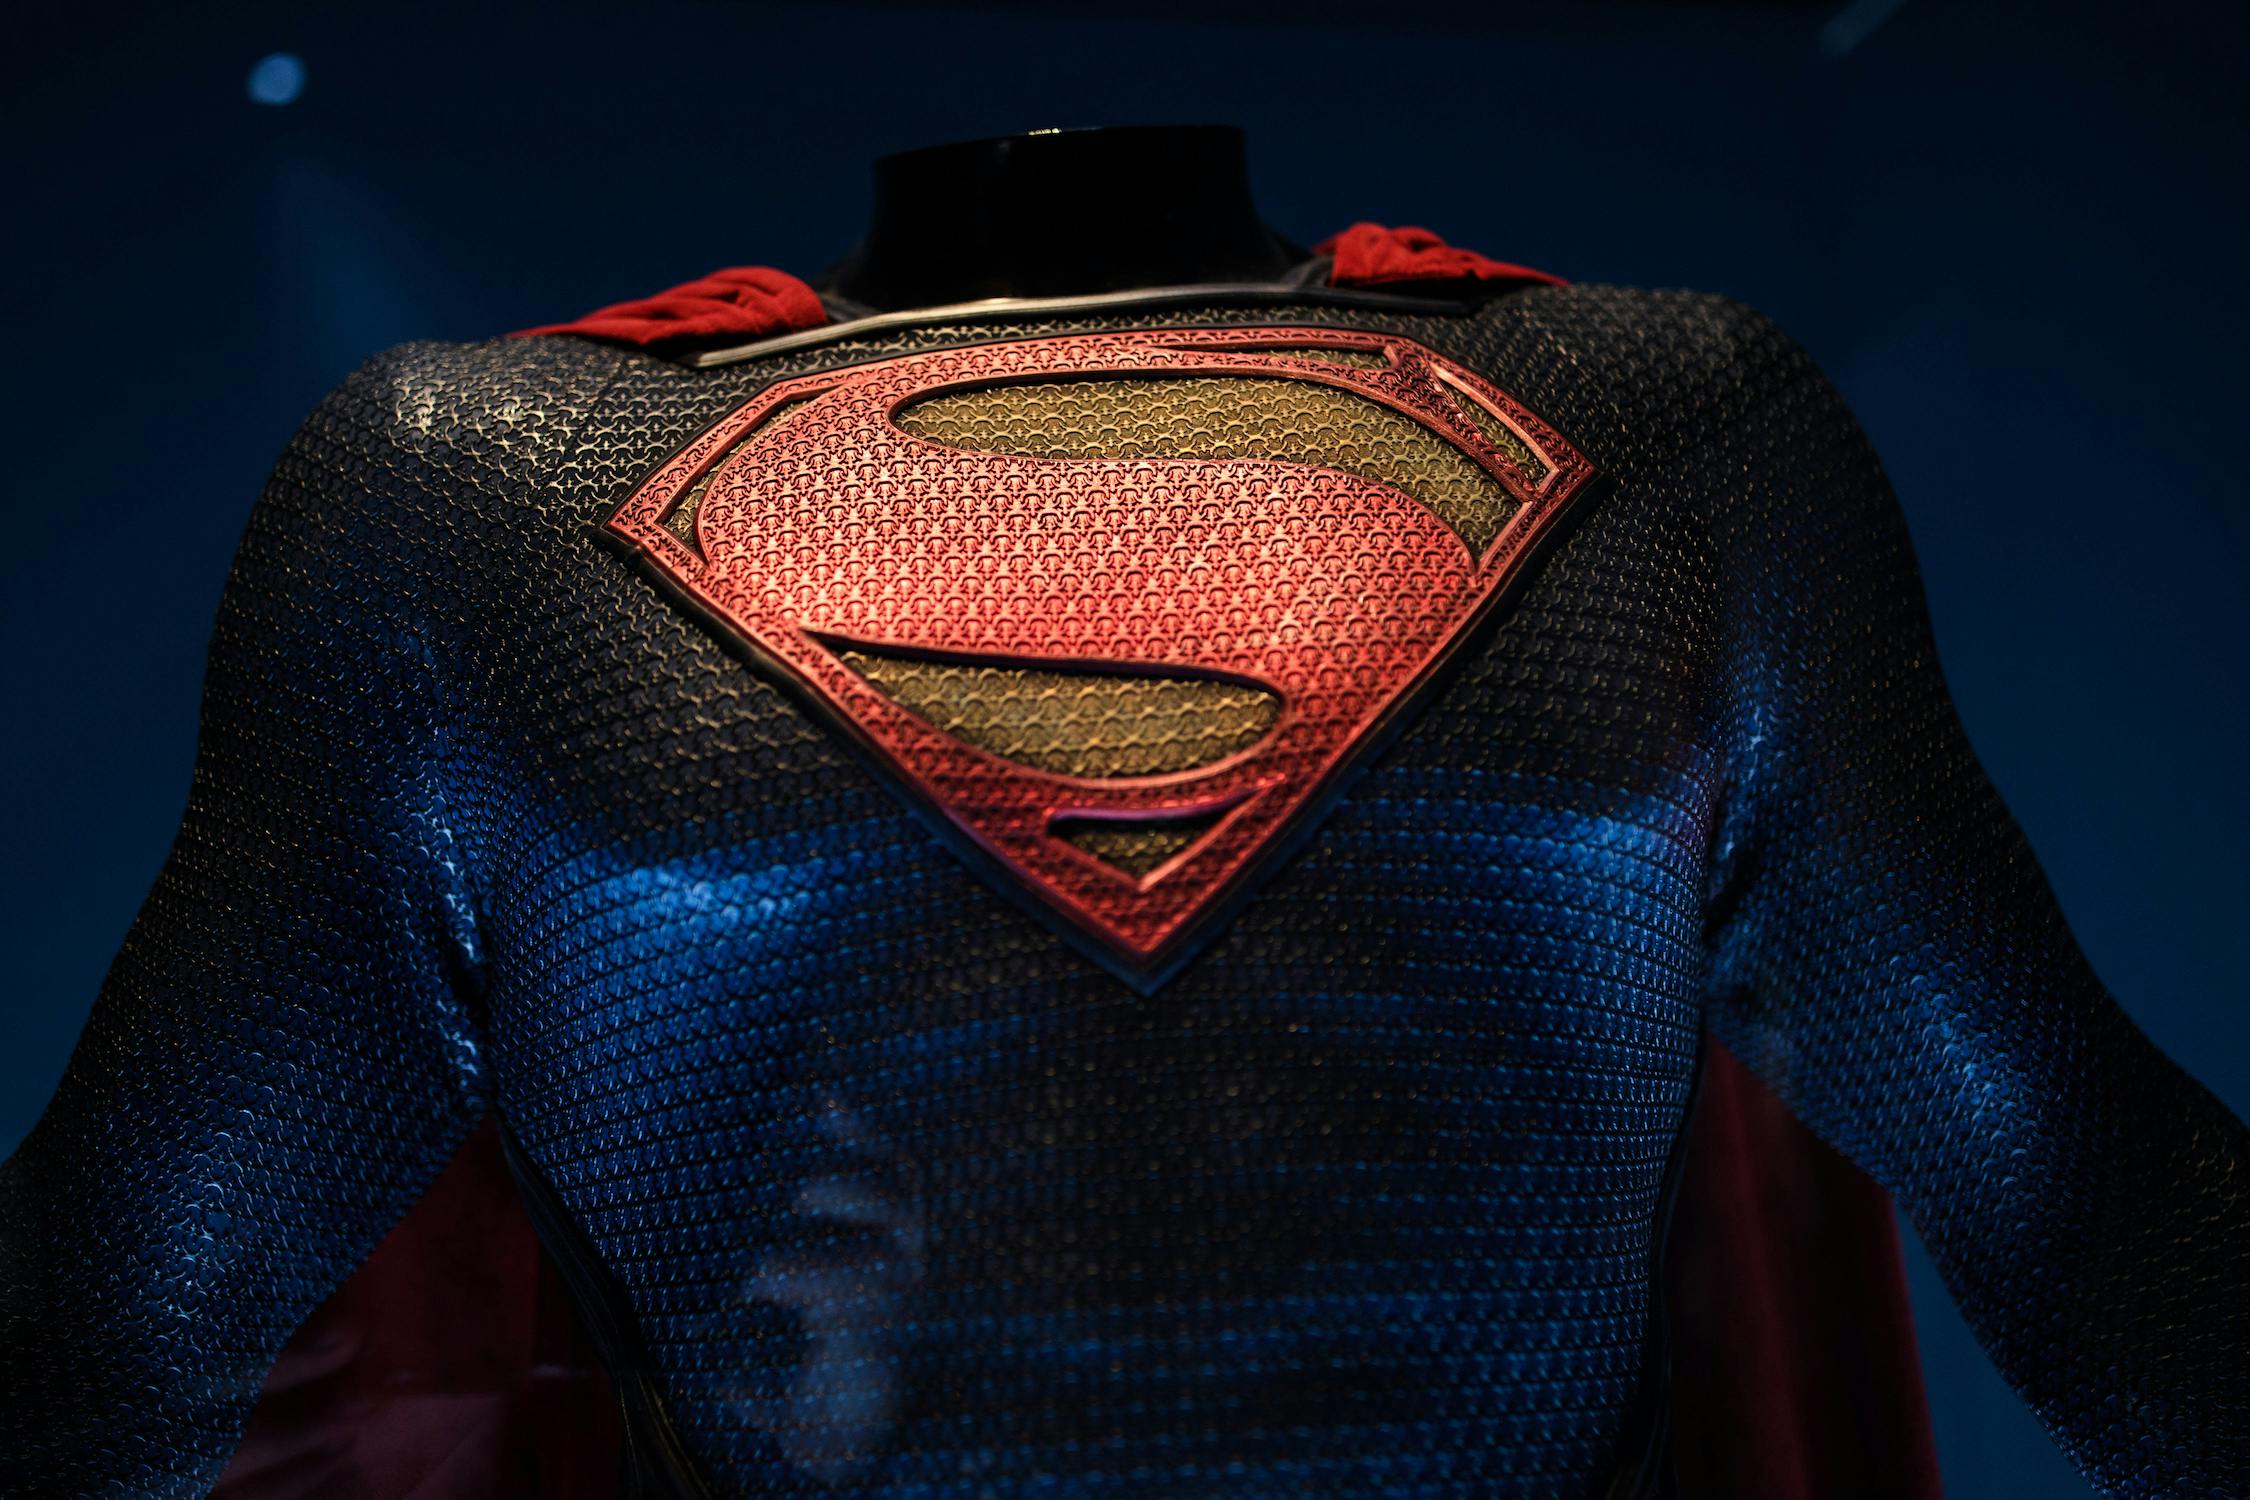 Who Will Be The Next Superman? — The Three Actors In The Running